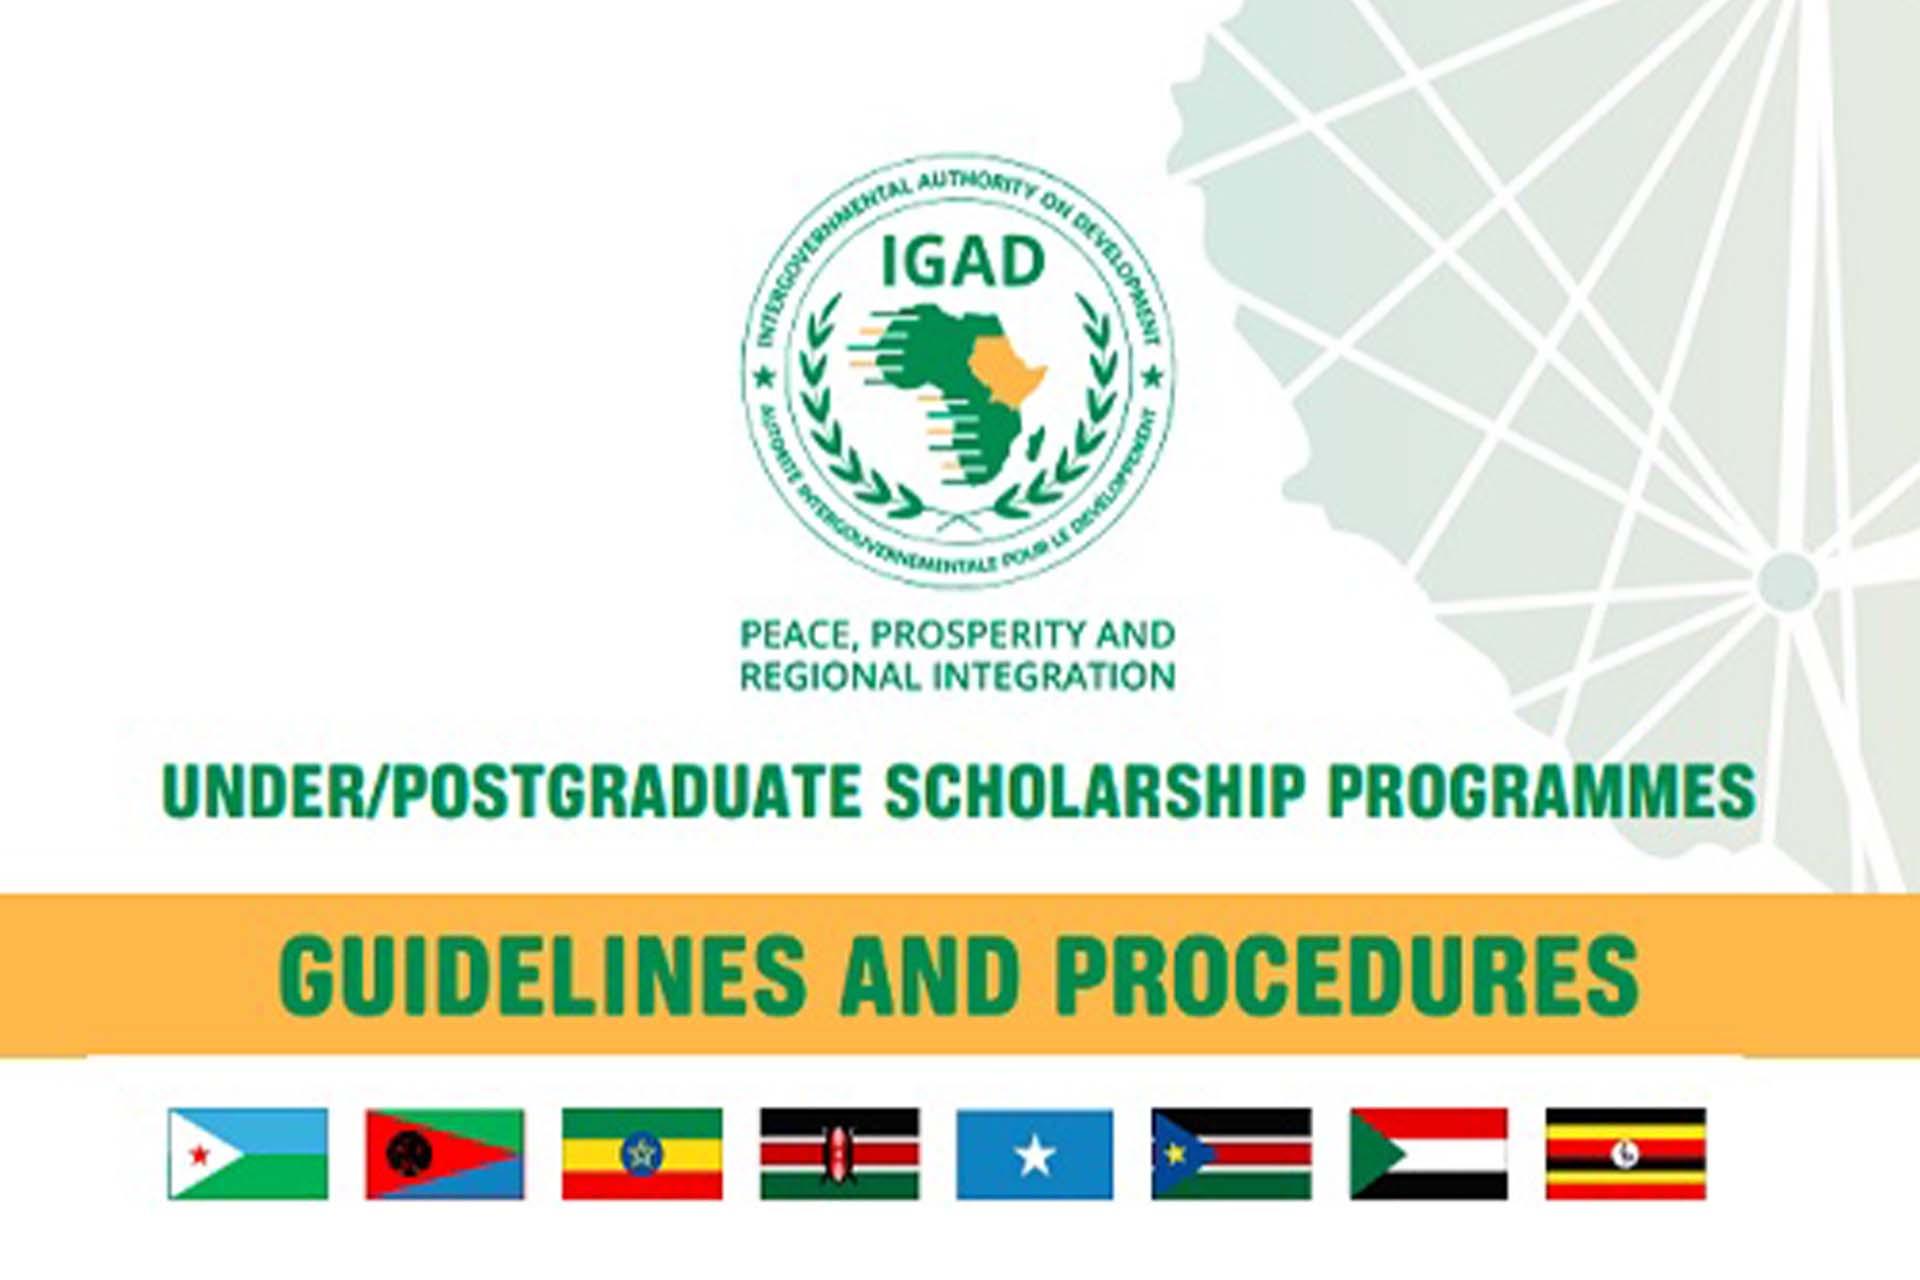 The Guidelines for the IGAD Scholarship Program